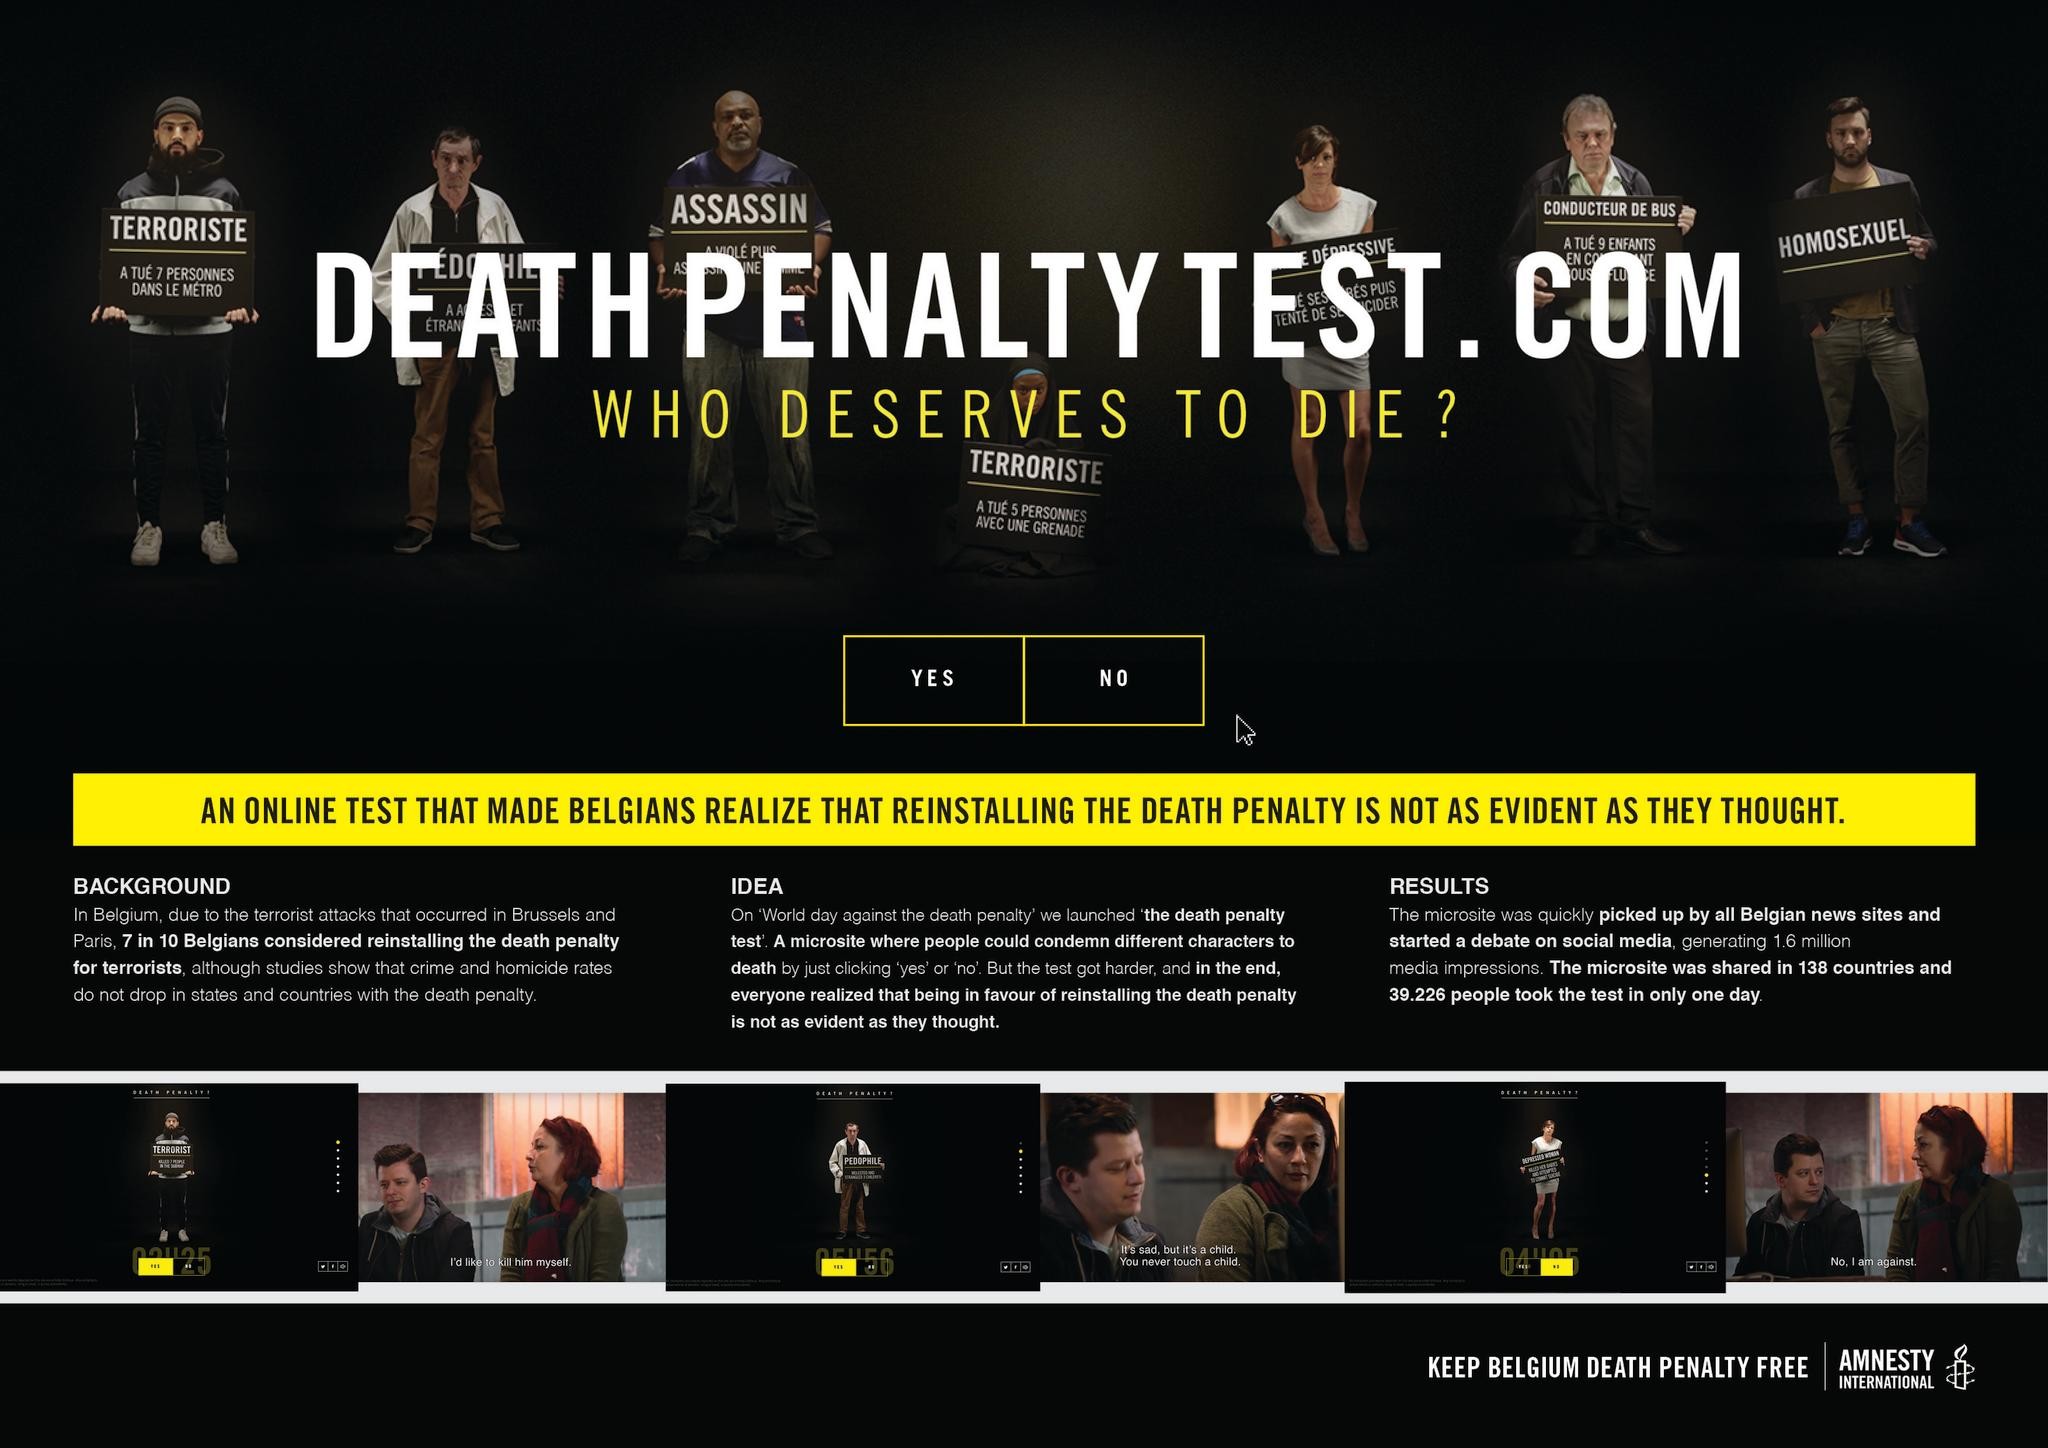 The Death Penalty Test